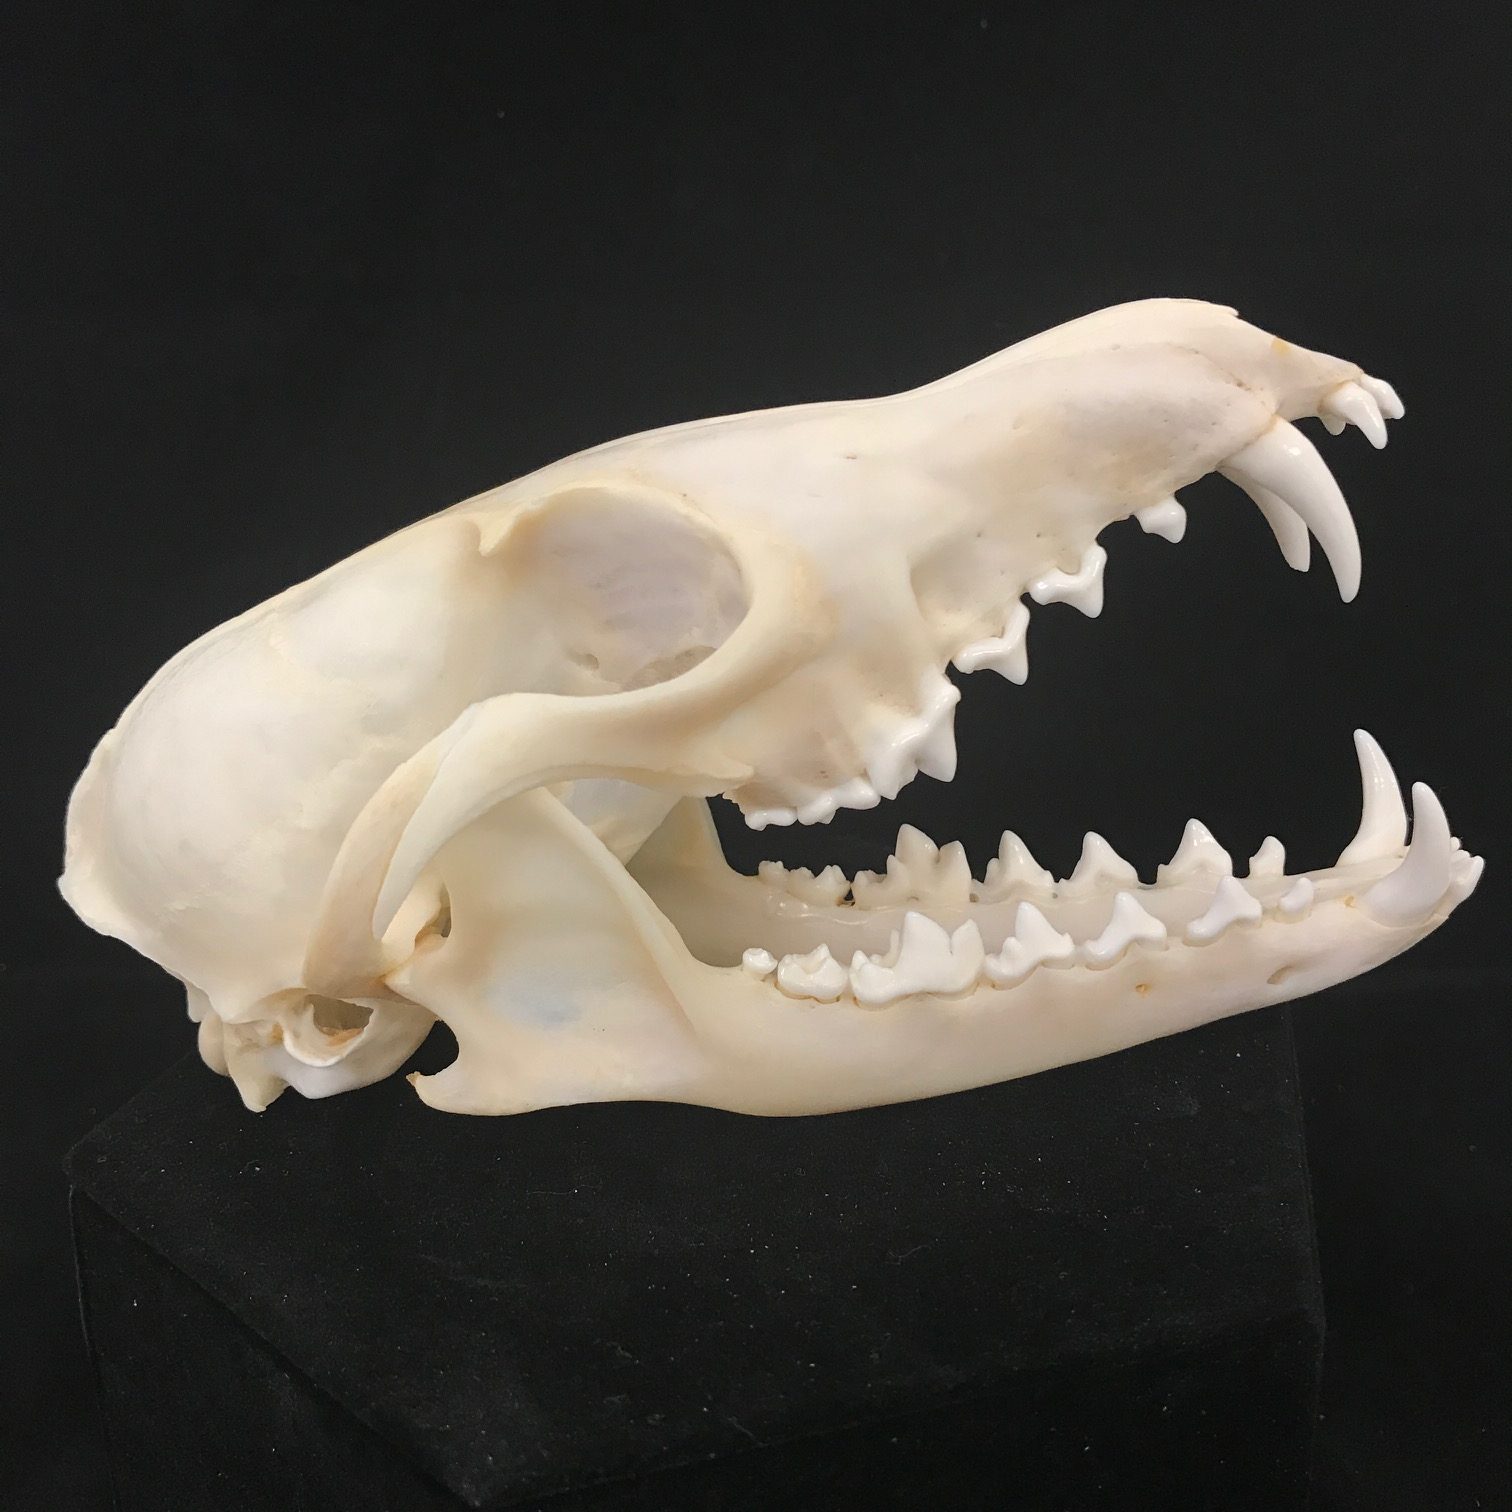 Beautiful, red fox skull with impressive canines, available at Natur